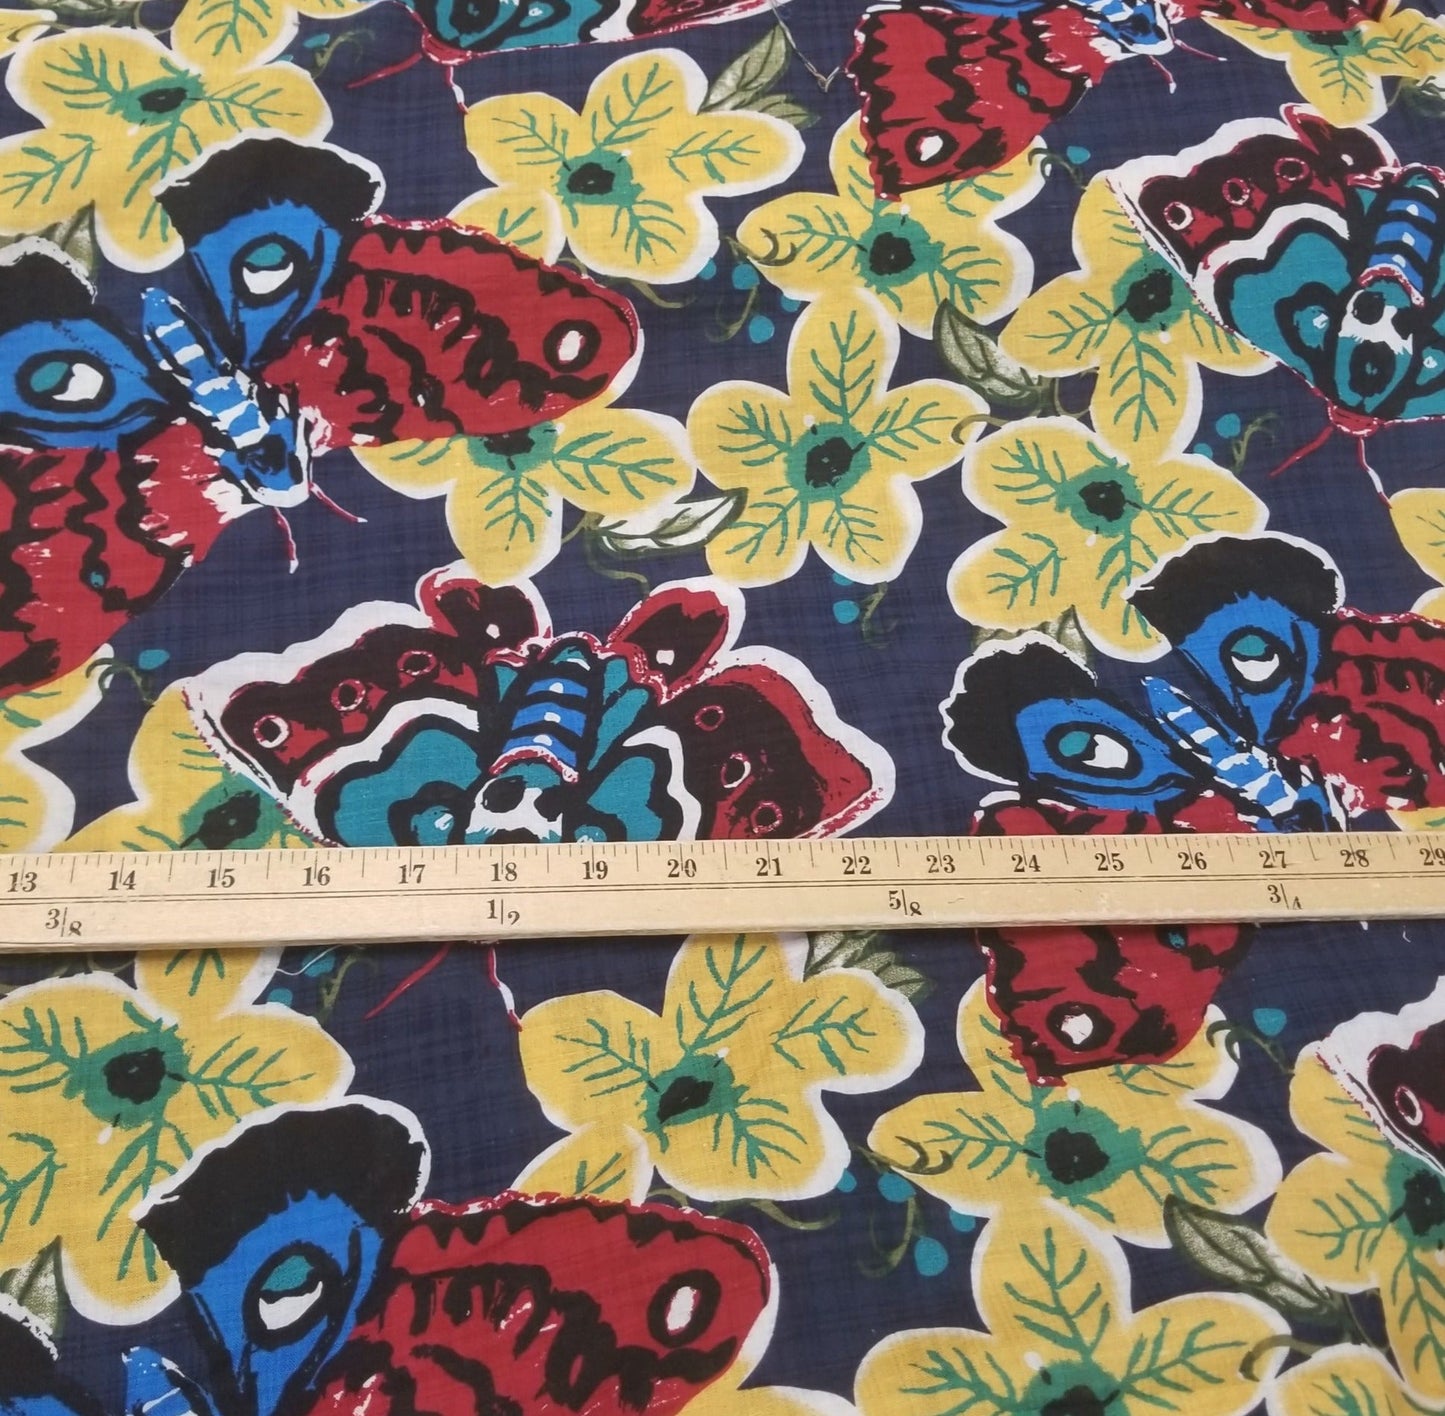 Designer Deadstock Navy Cross Hatch Yellow Floral Cotton Lawn 2.36 oz - Sold by the yard